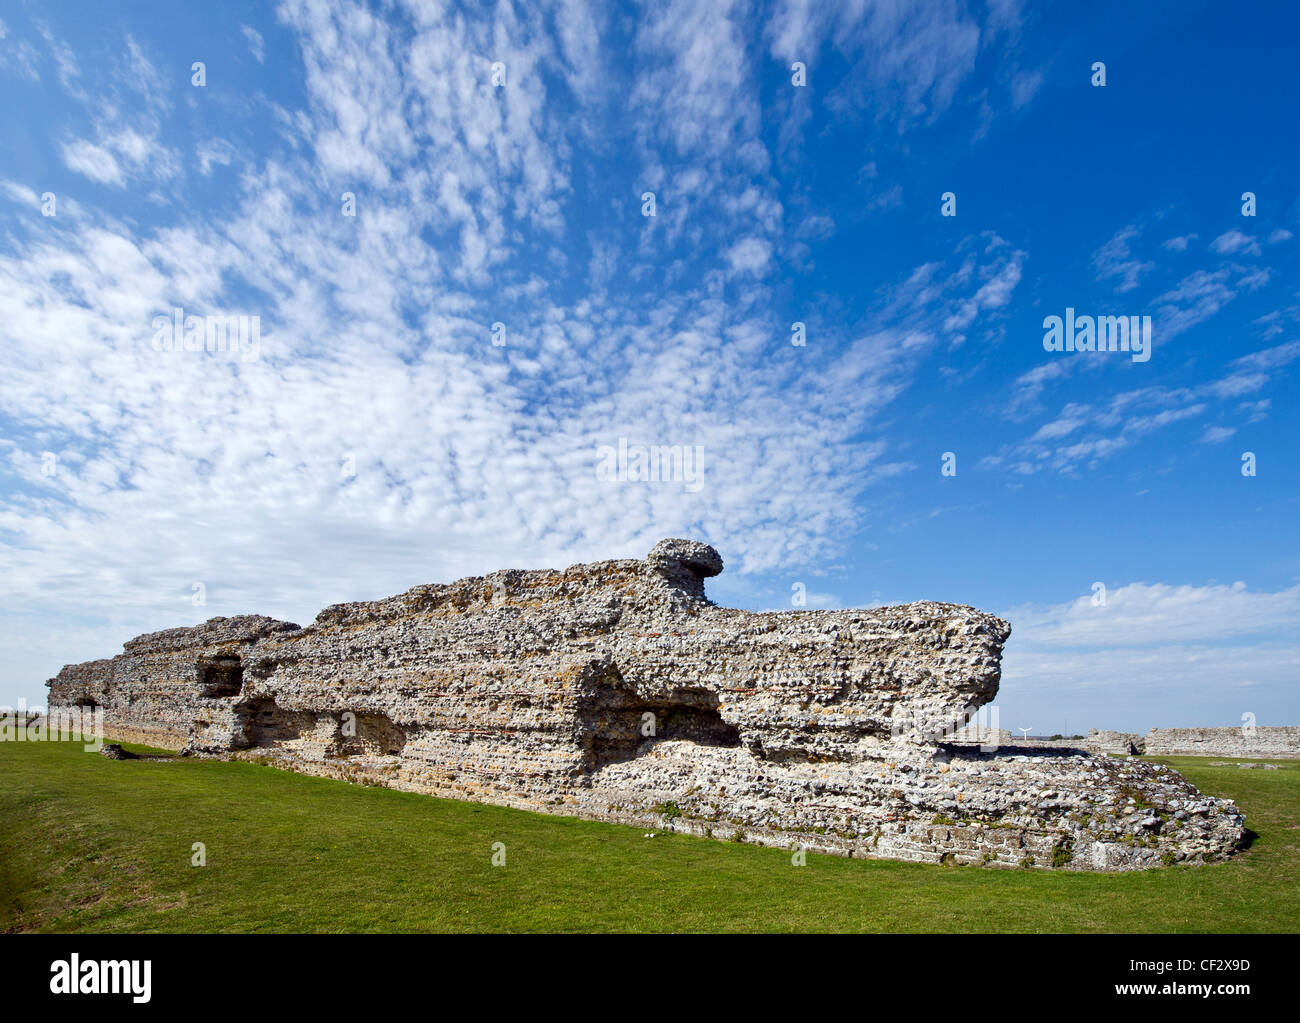 The remains of stone walls at Richborough Roman Fort, one of the most important Roman sites in the UK. Stock Photo